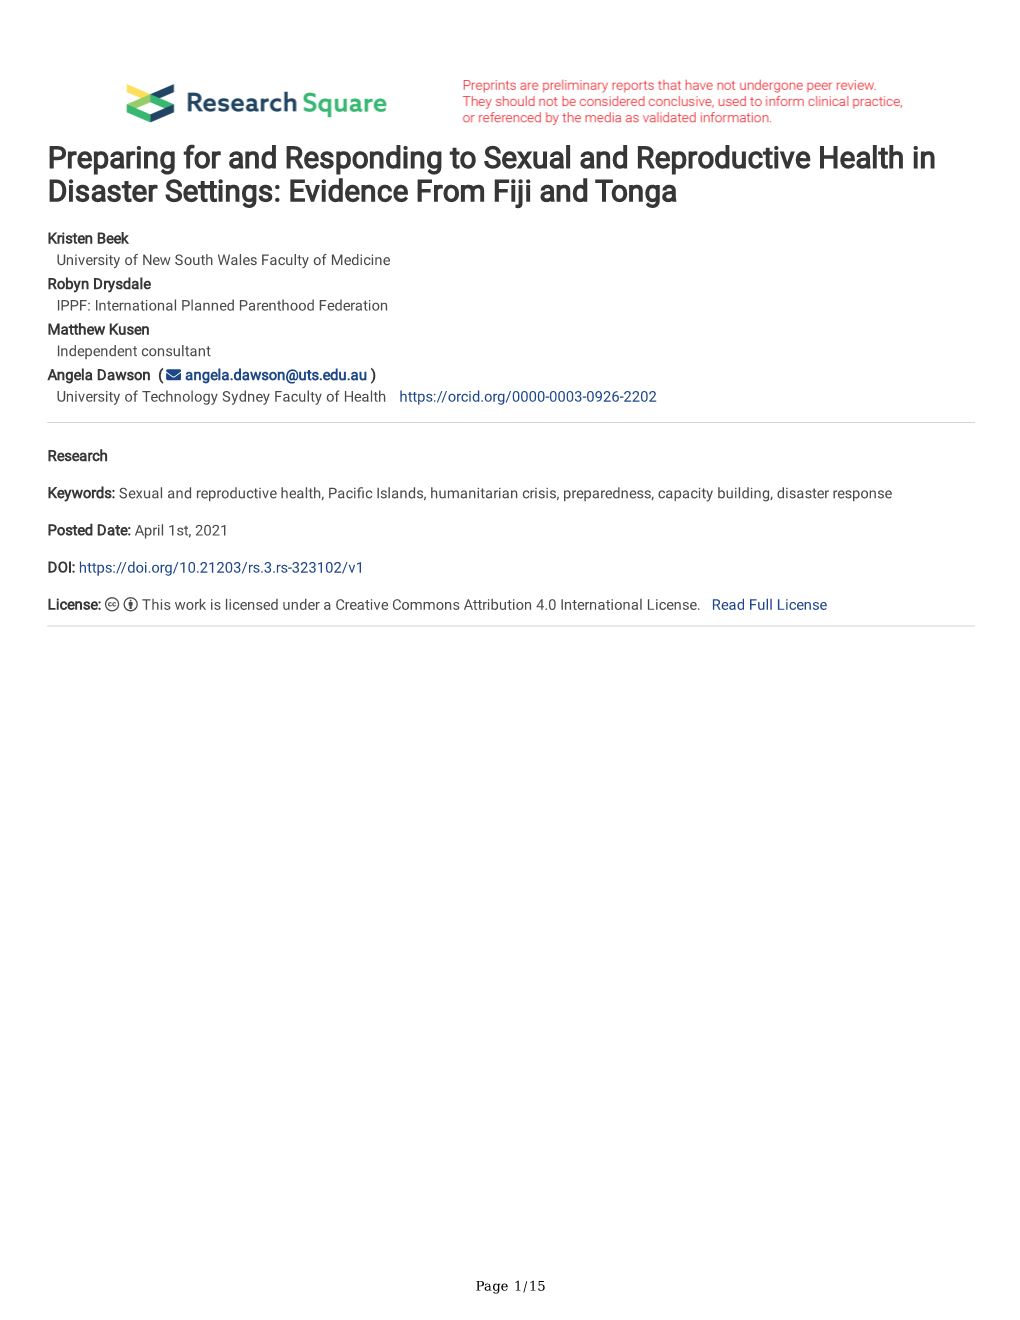 Preparing for and Responding to Sexual and Reproductive Health in Disaster Settings: Evidence from Fiji and Tonga